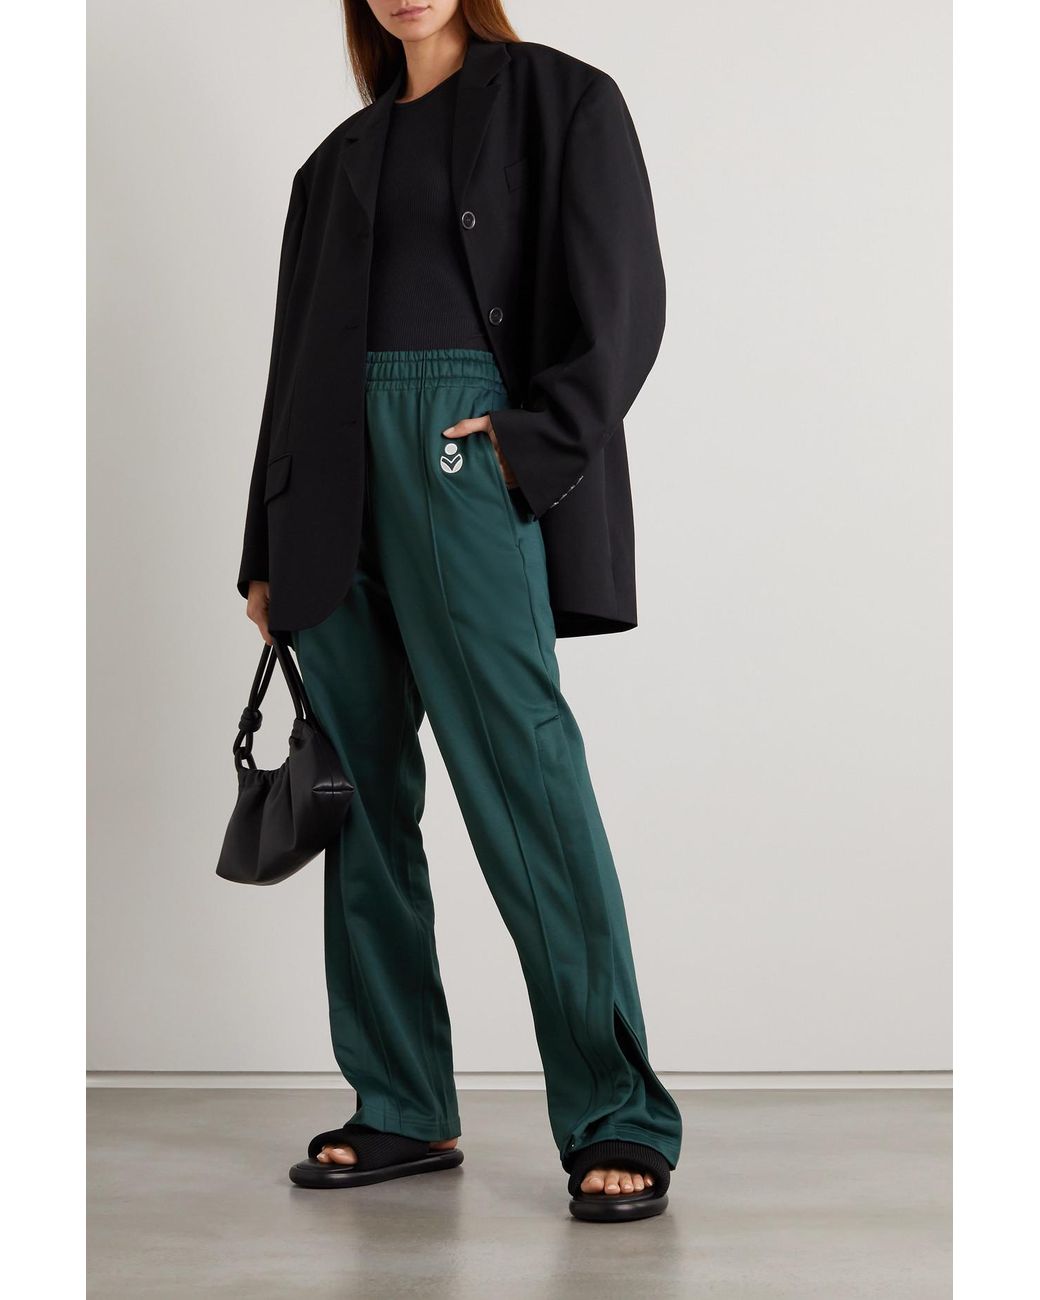 Étoile Isabel Marant Inaya Embroidered Jersey Track Pants in Green | Lyst  Canada